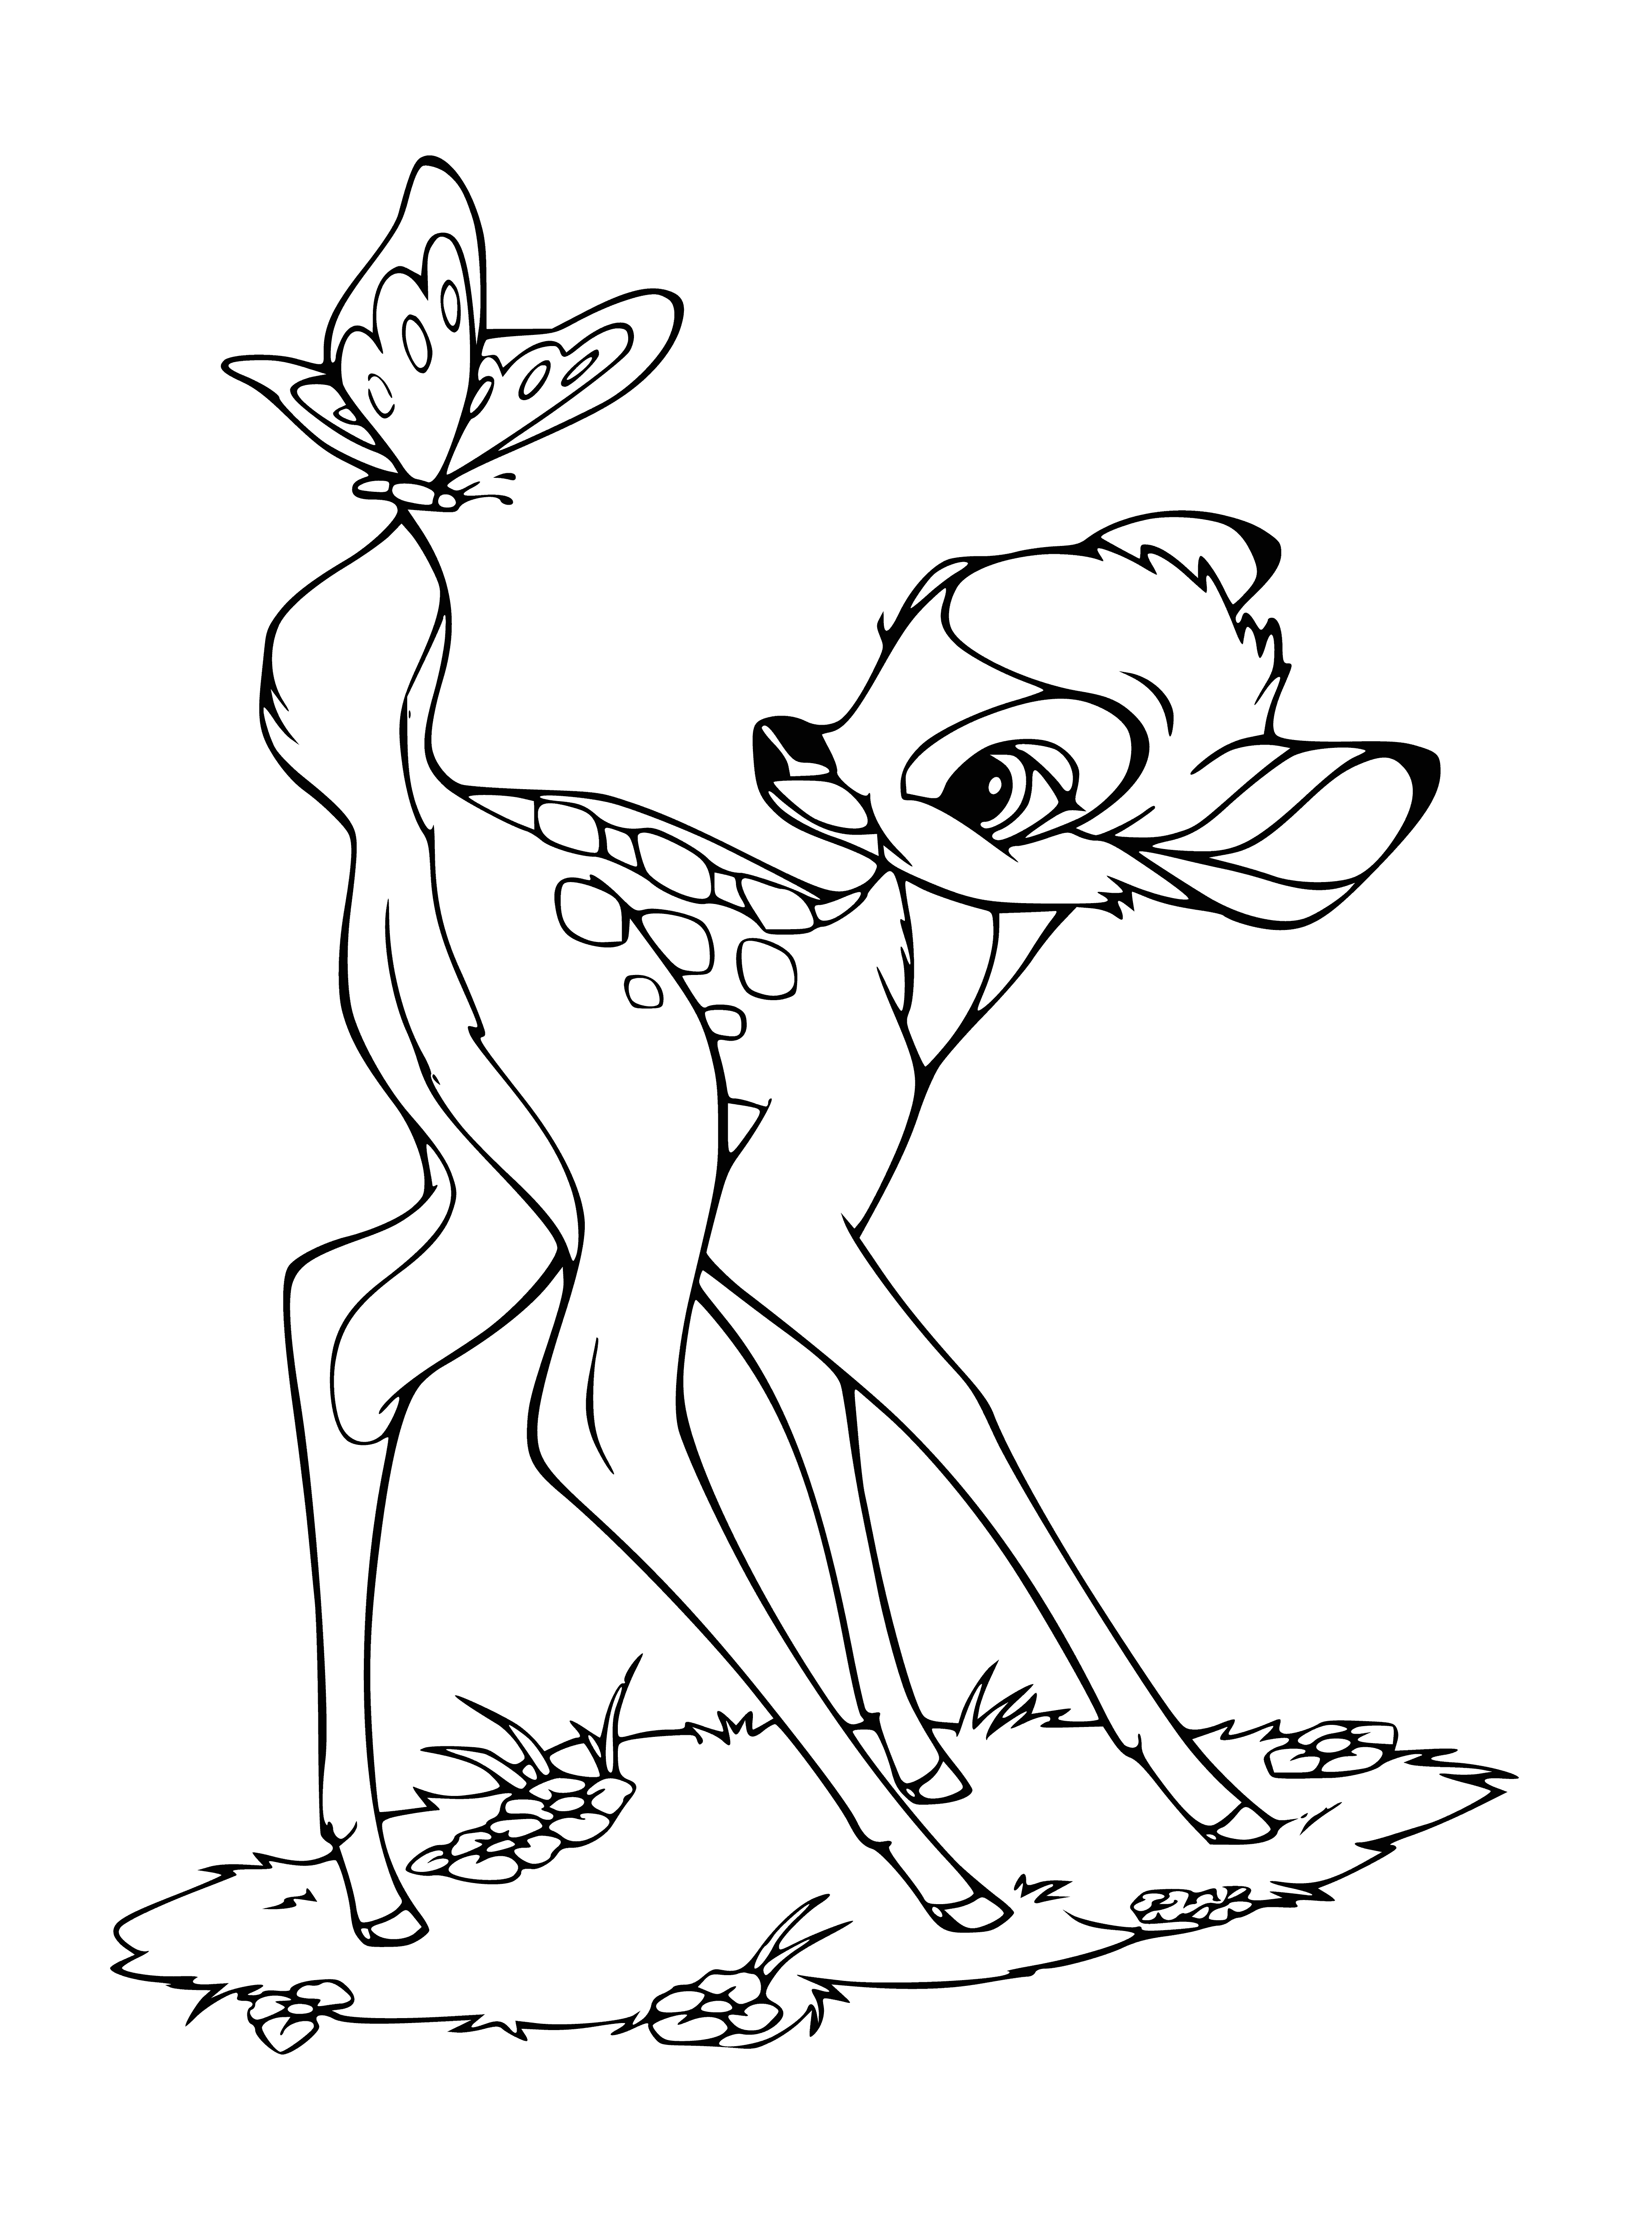 Bambi and the butterfly coloring page